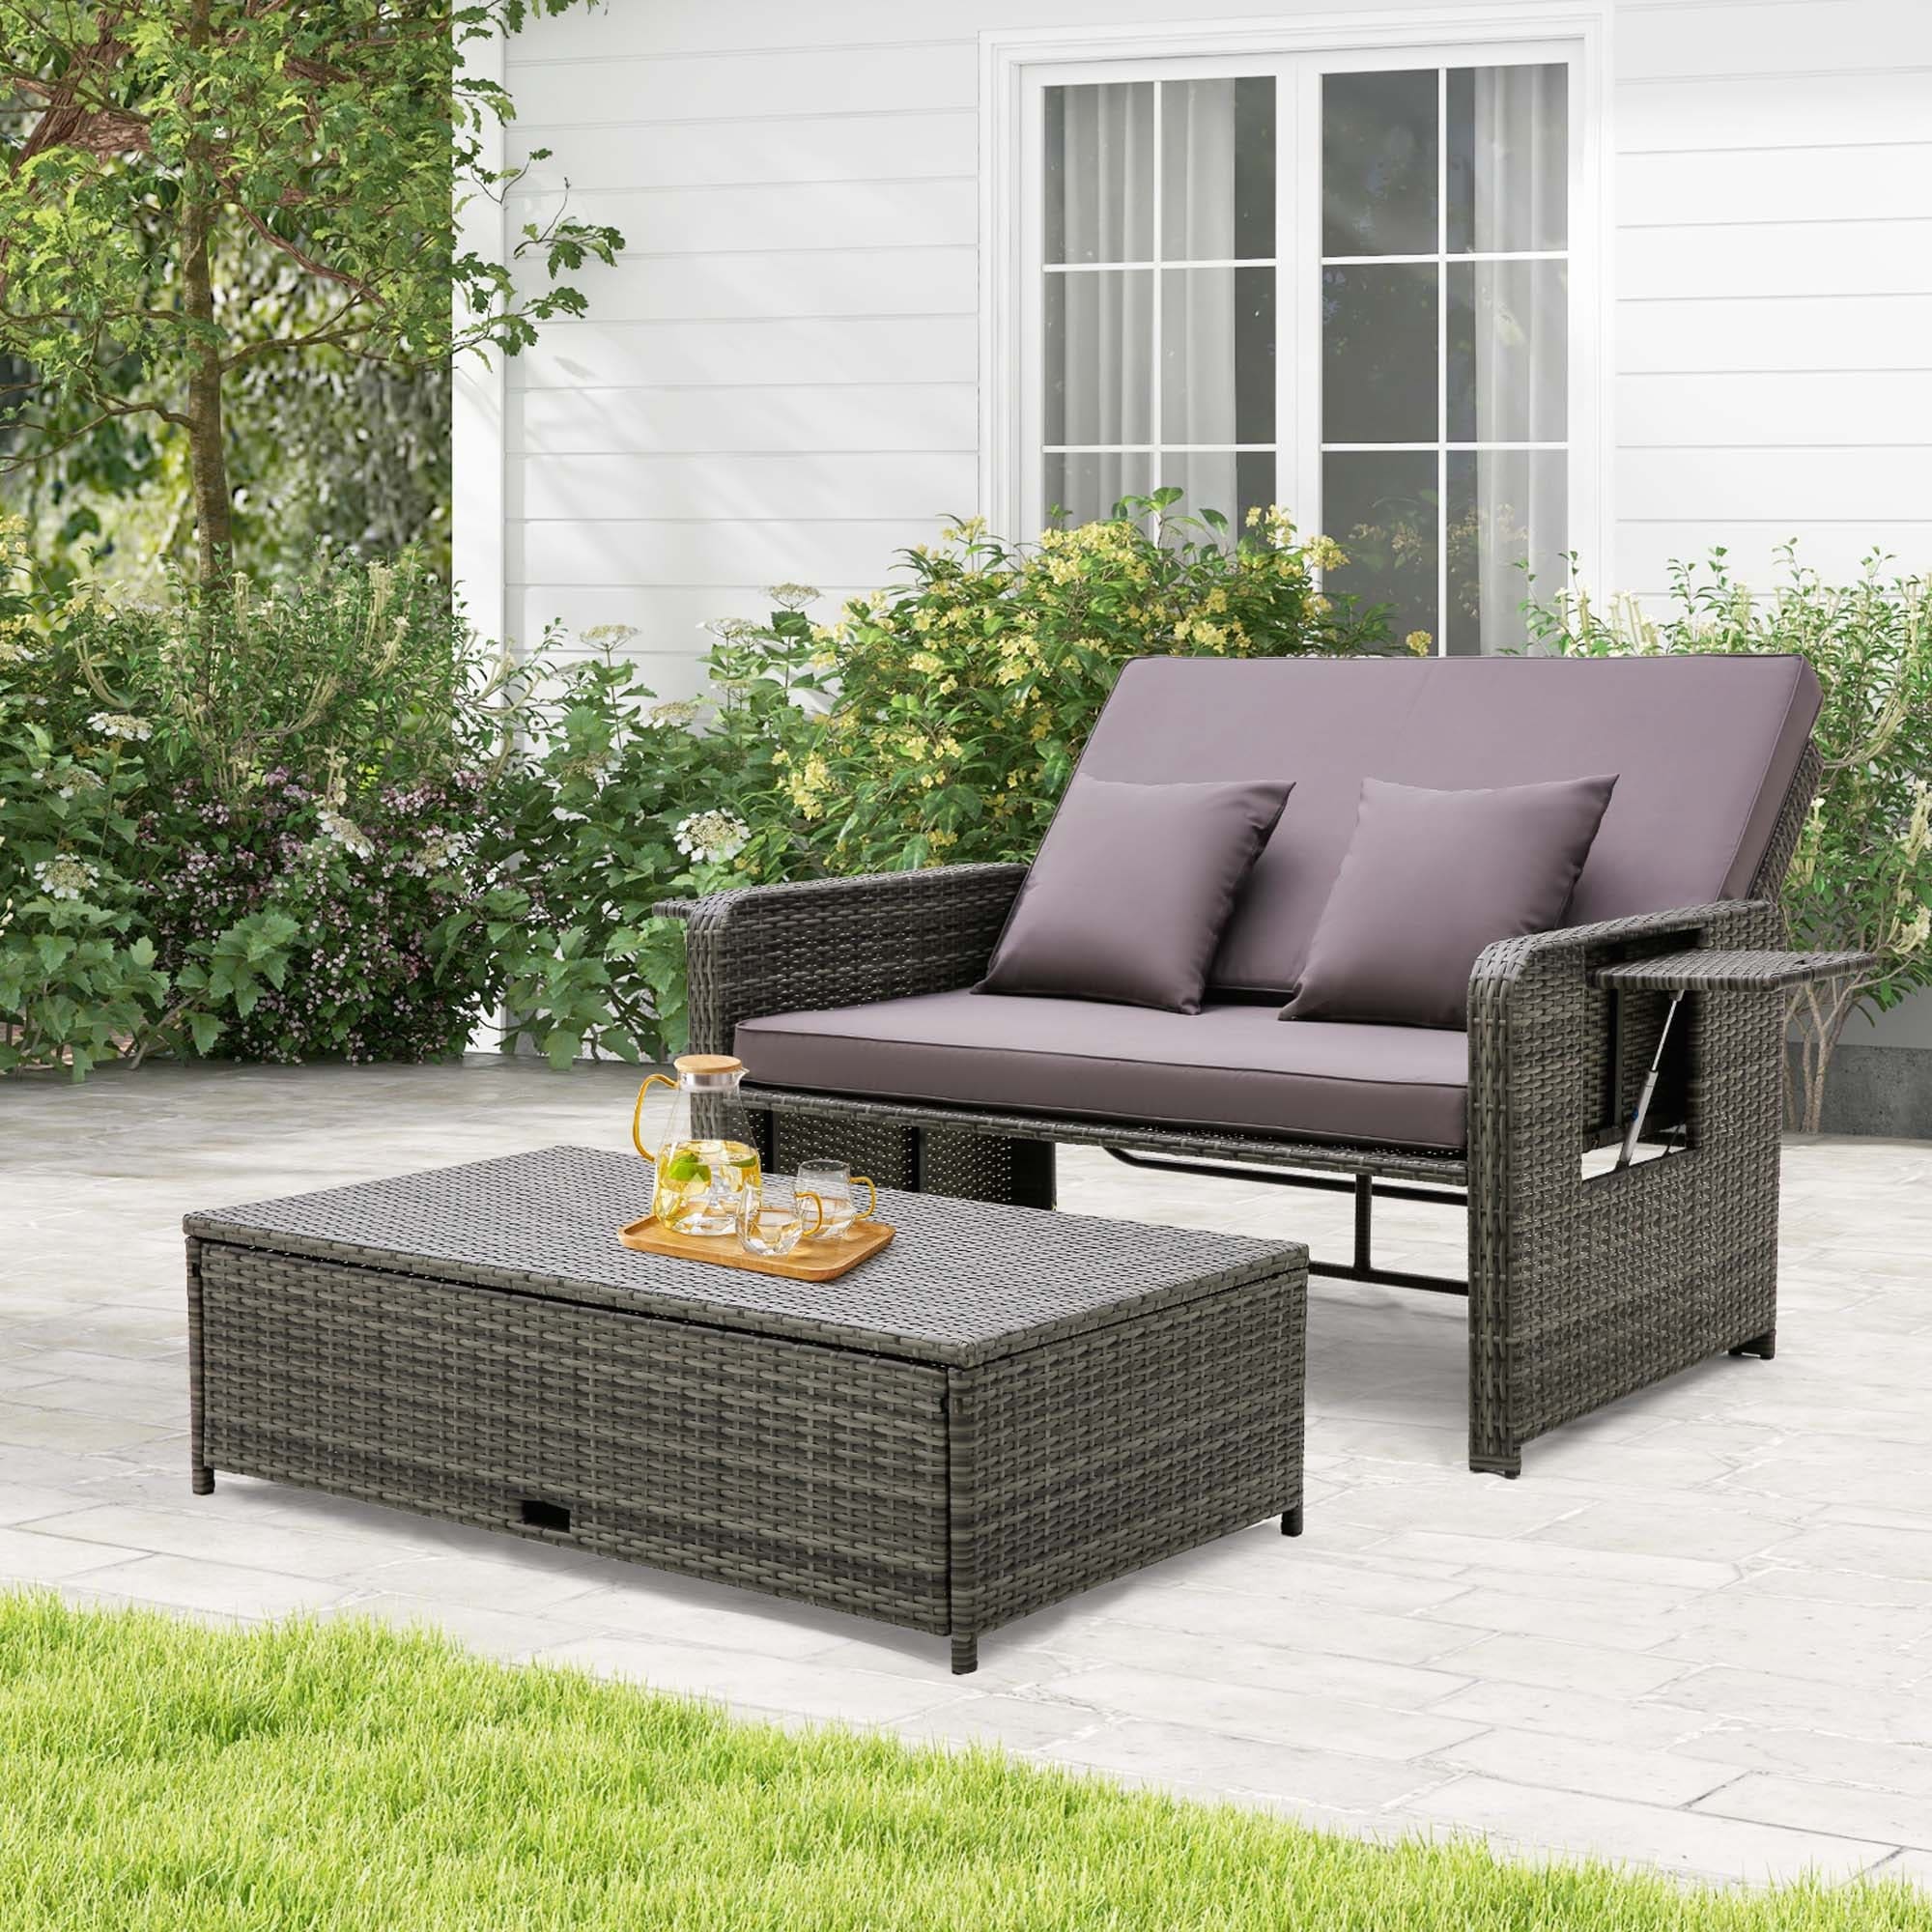 https://ak1.ostkcdn.com/images/products/is/images/direct/6bda27c197ec793082de161fa19e8c4d0ae70d97/Costway-Patio-Rattan-Daybed-Set-Wicker-Loveseat-Sofa-with-Ottoman-%26.jpg